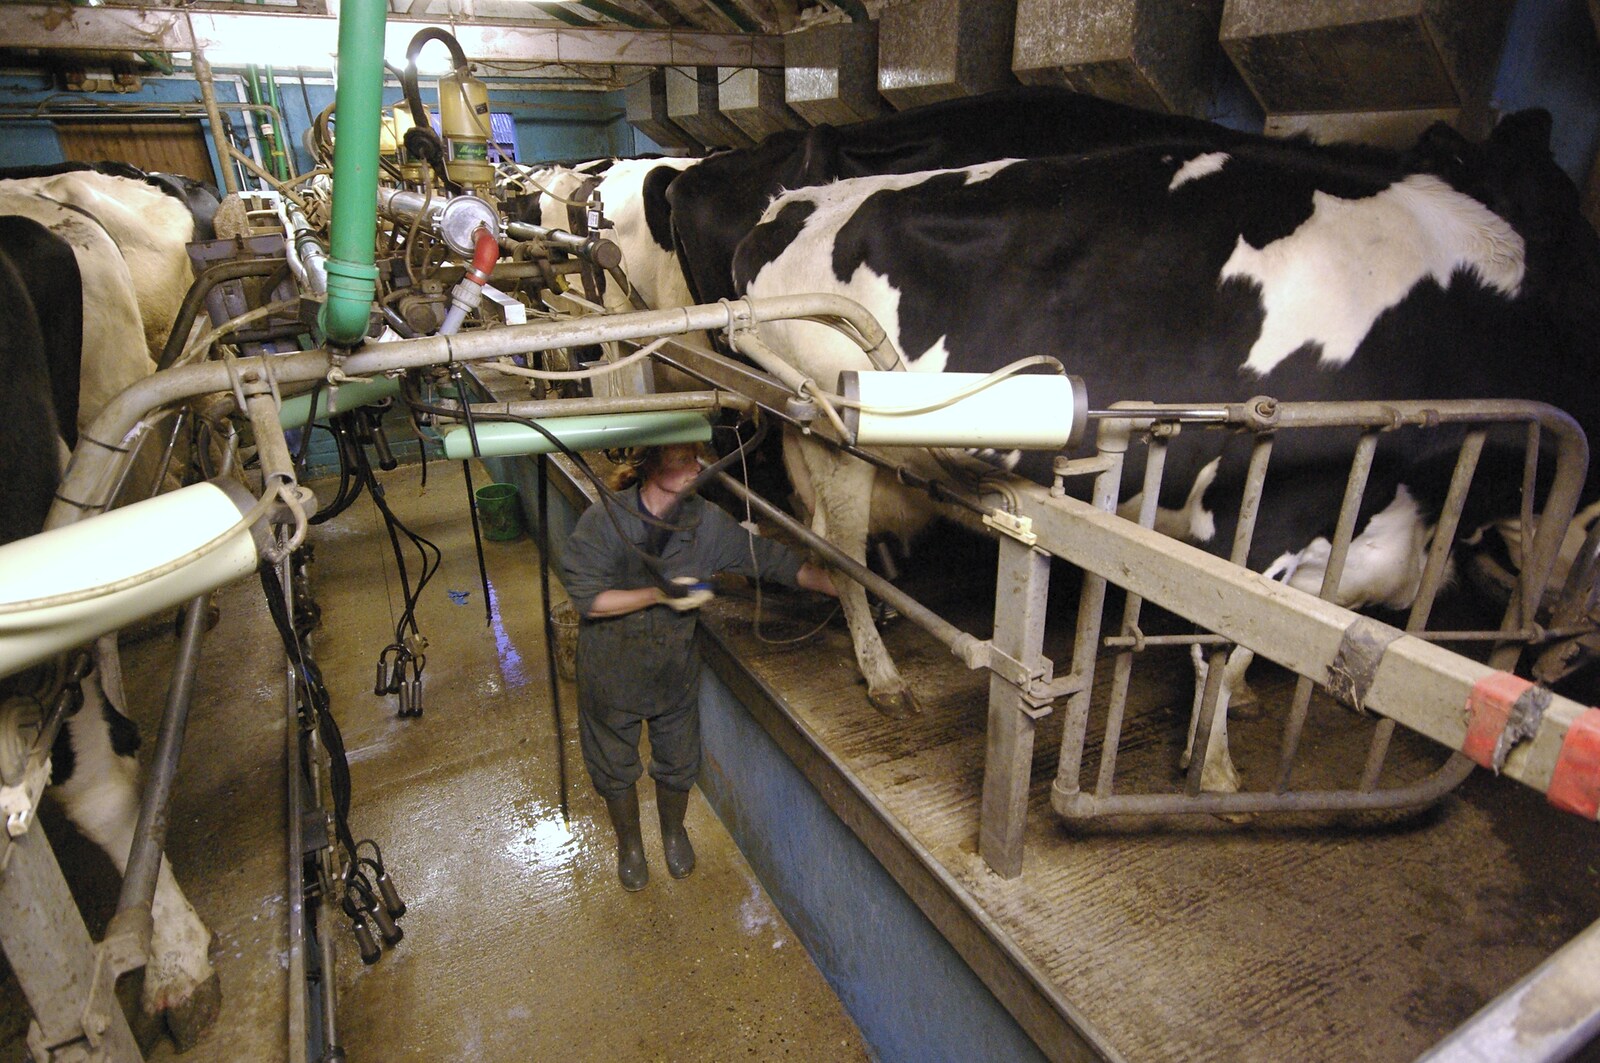 Looking down at Wavy in the pit from The Last Milking at Dairy Farm, Thrandeston, Suffolk - 11th January 2007